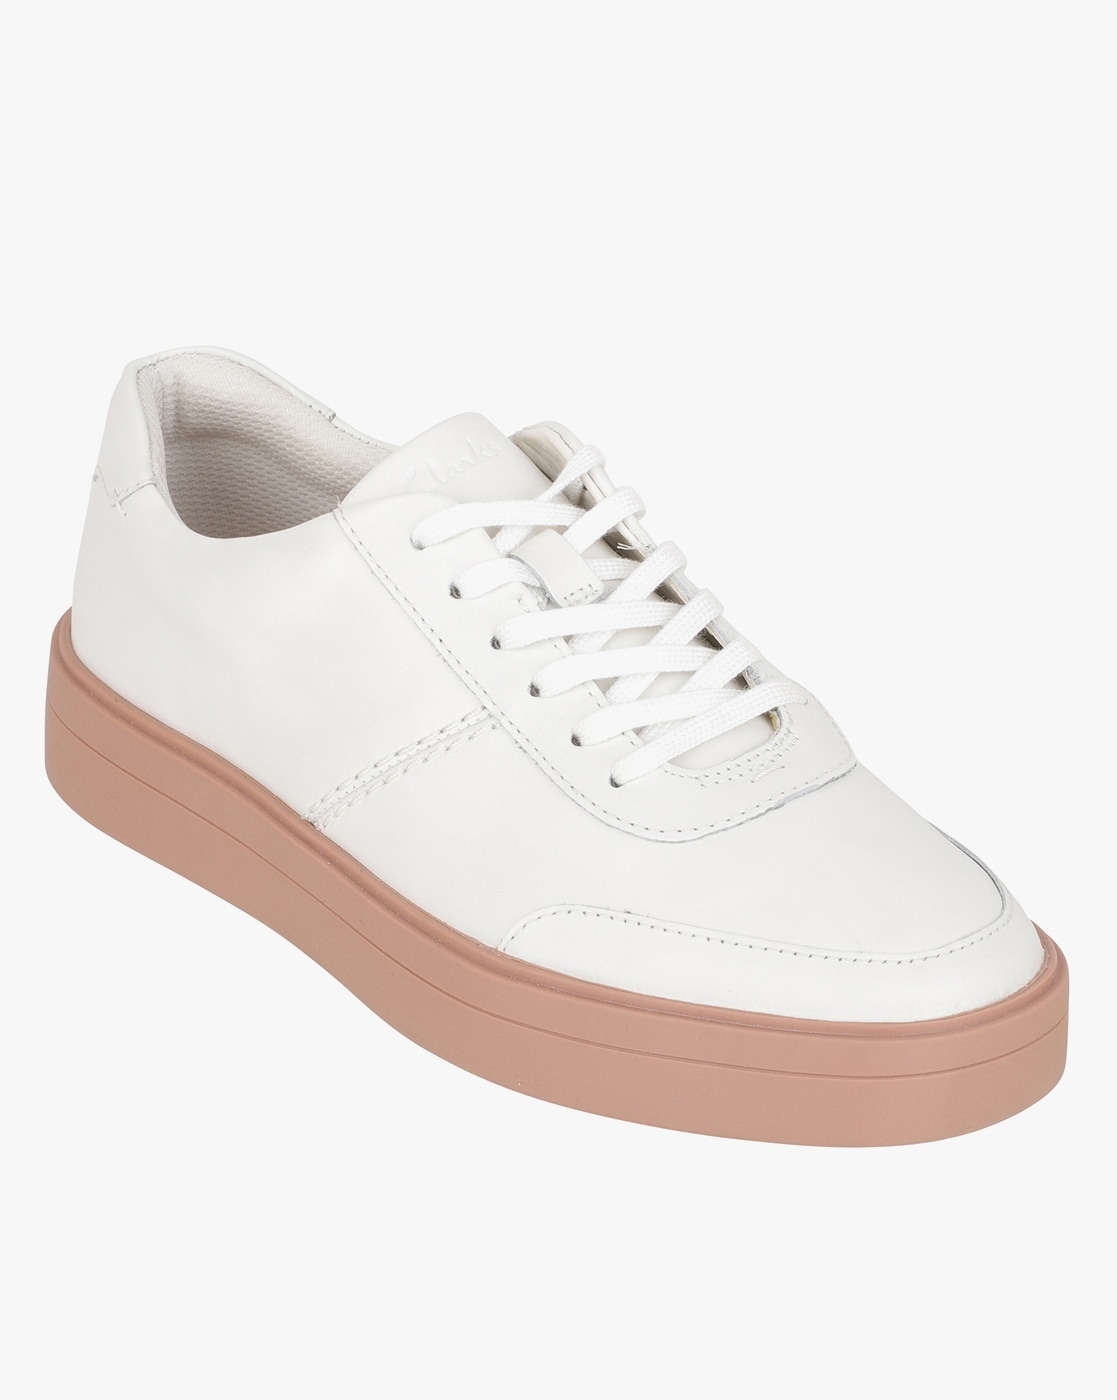 Clarks Breeze Ave White - Now on Sale!